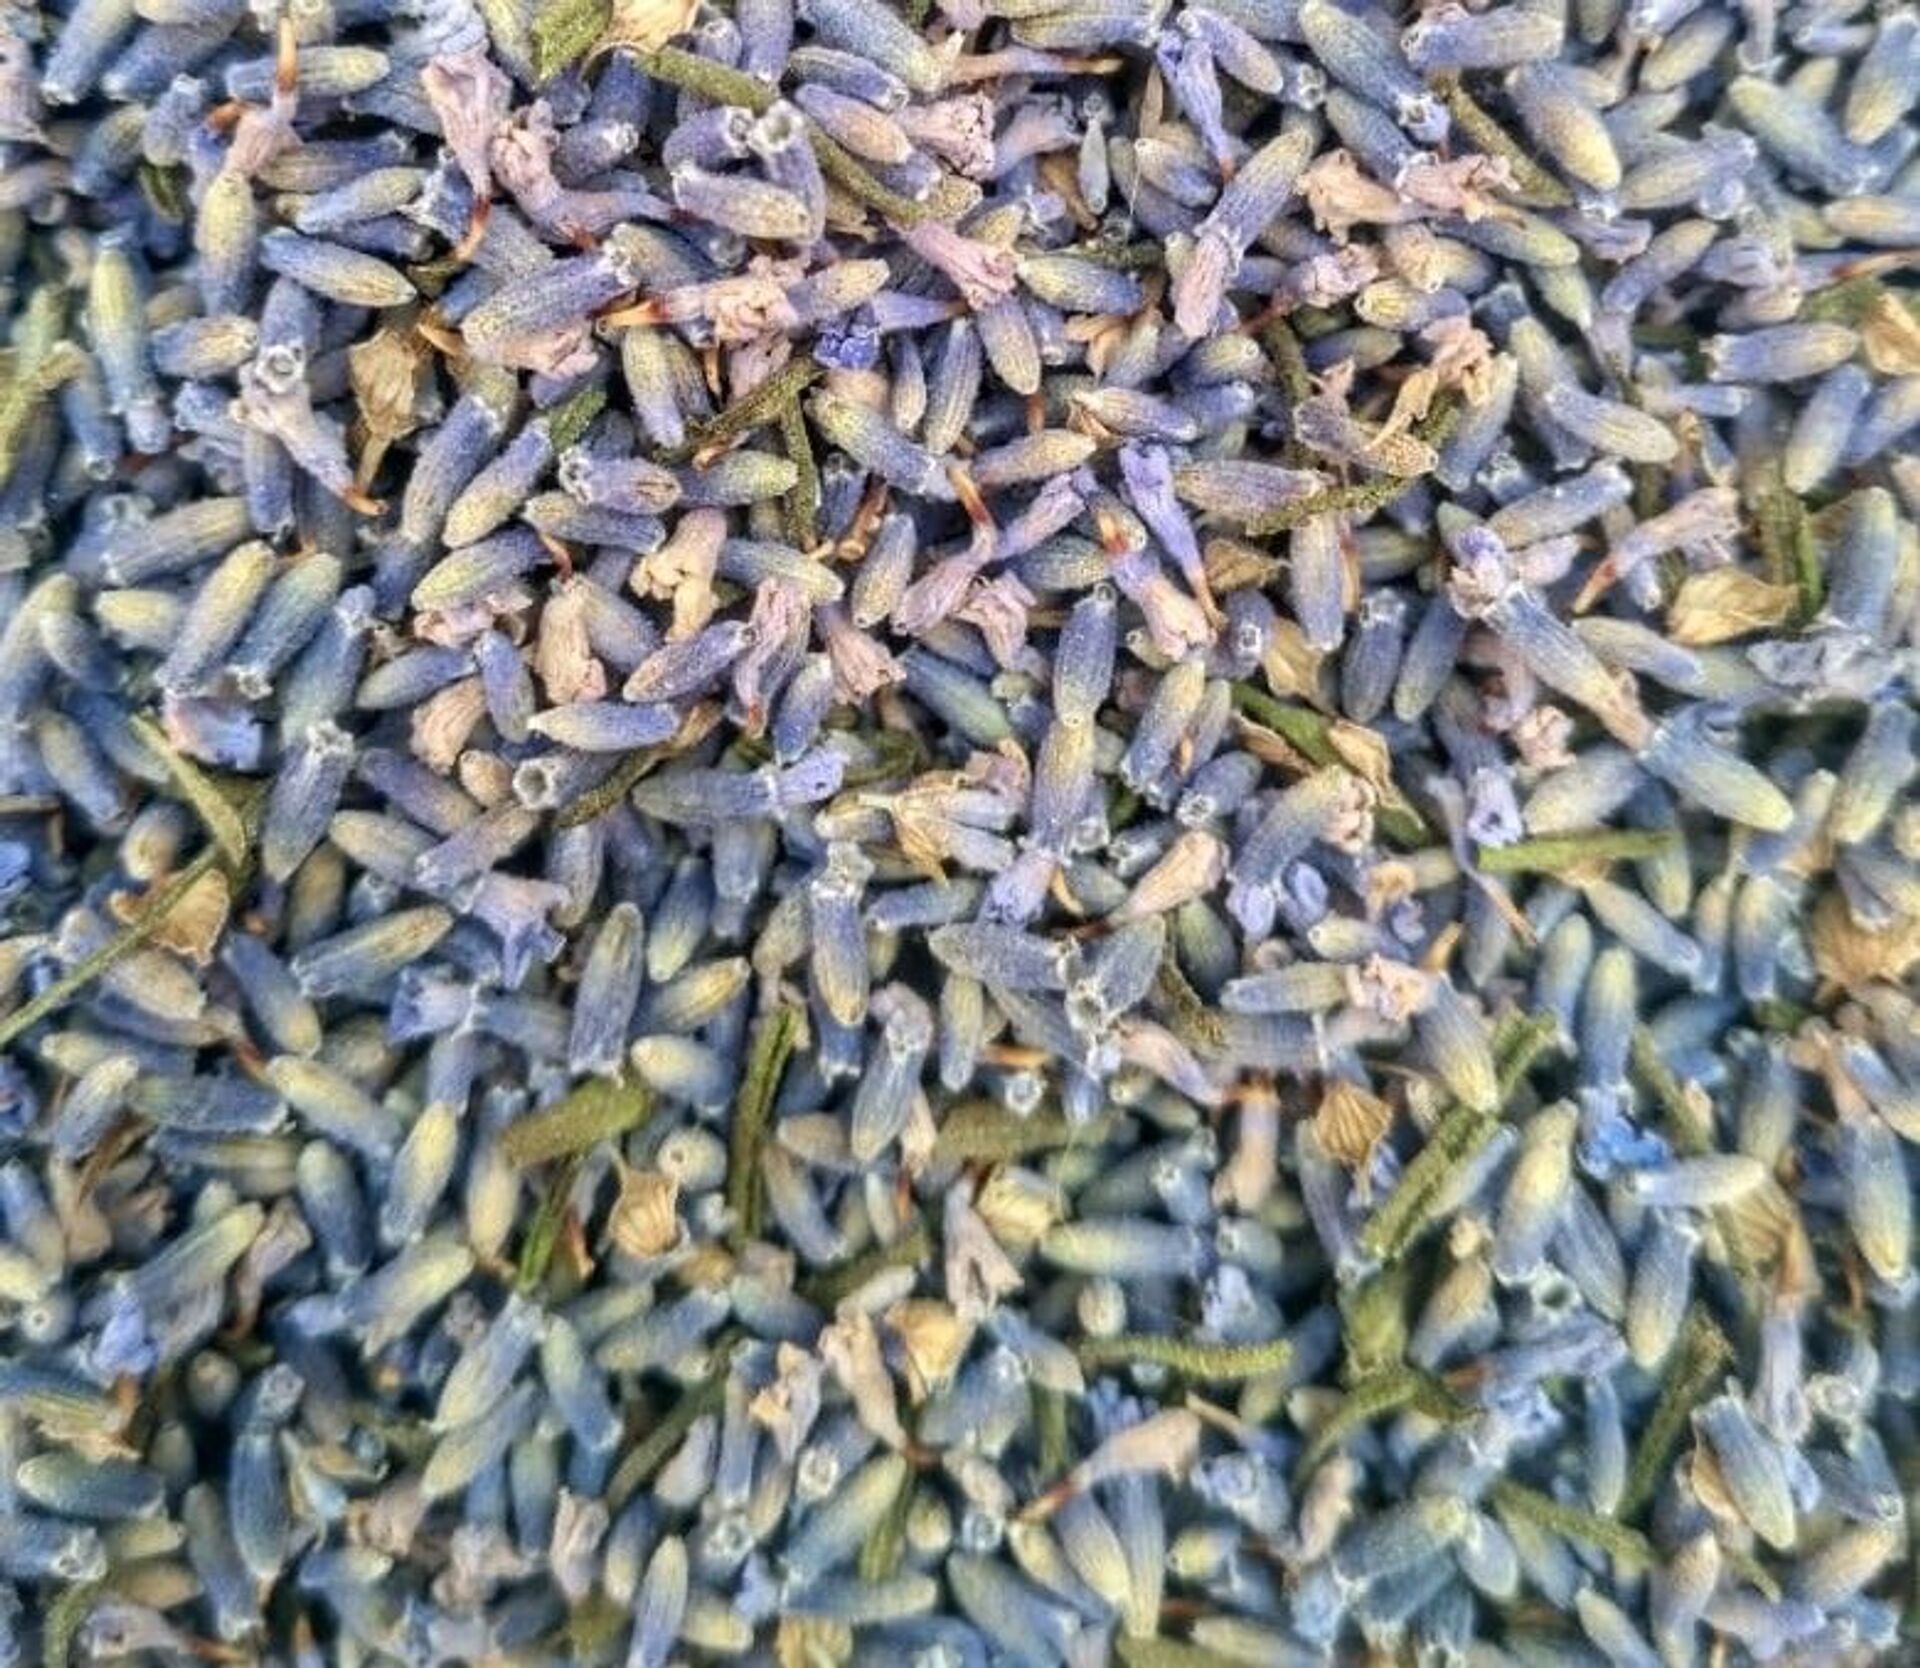 Harvested and dried lavender flowers from Bharat Bhushan's farm in Jammu and Kashmir's Doda district. - Sputnik International, 1920, 07.09.2021